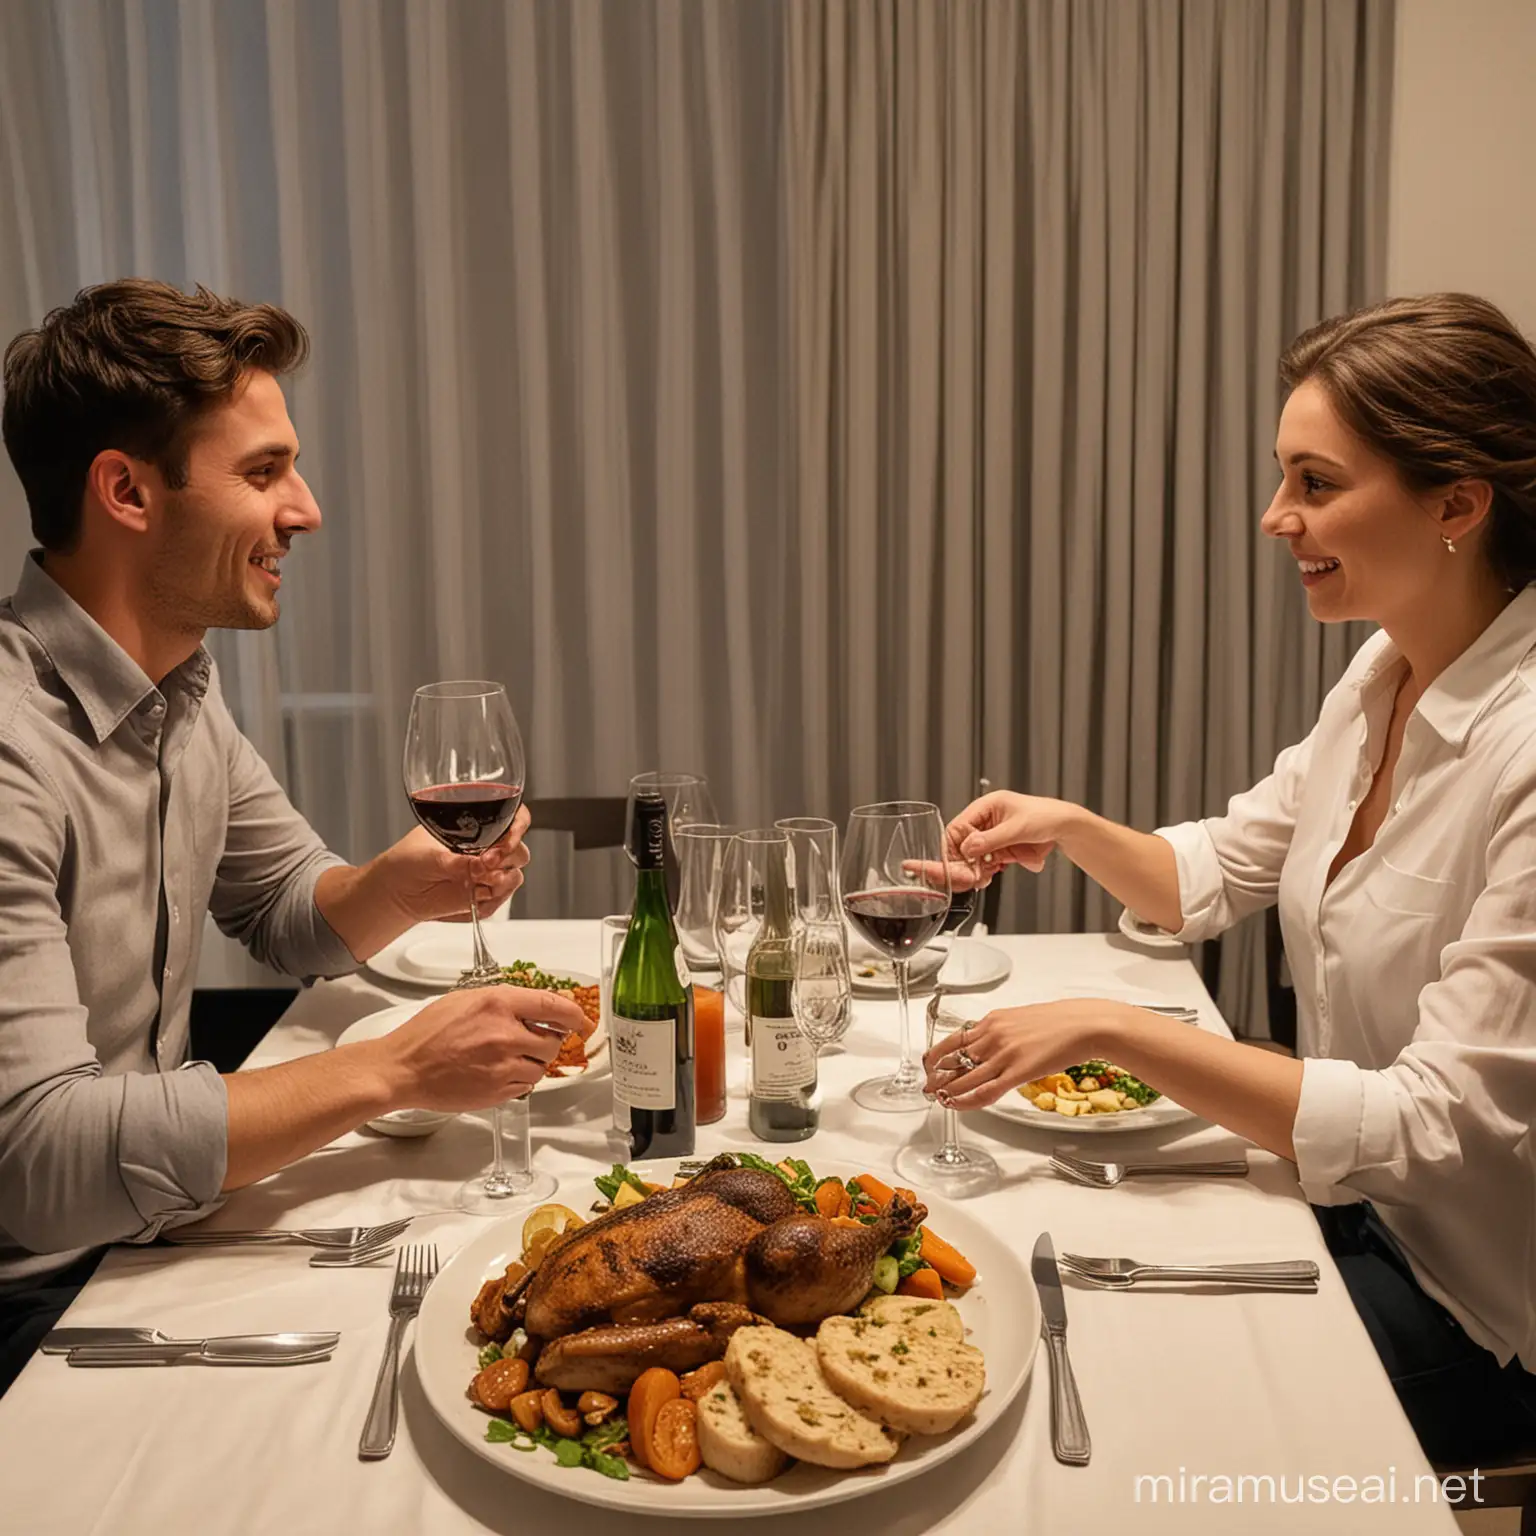 Intimate Dinner for Two Romantic Couple Dining Together